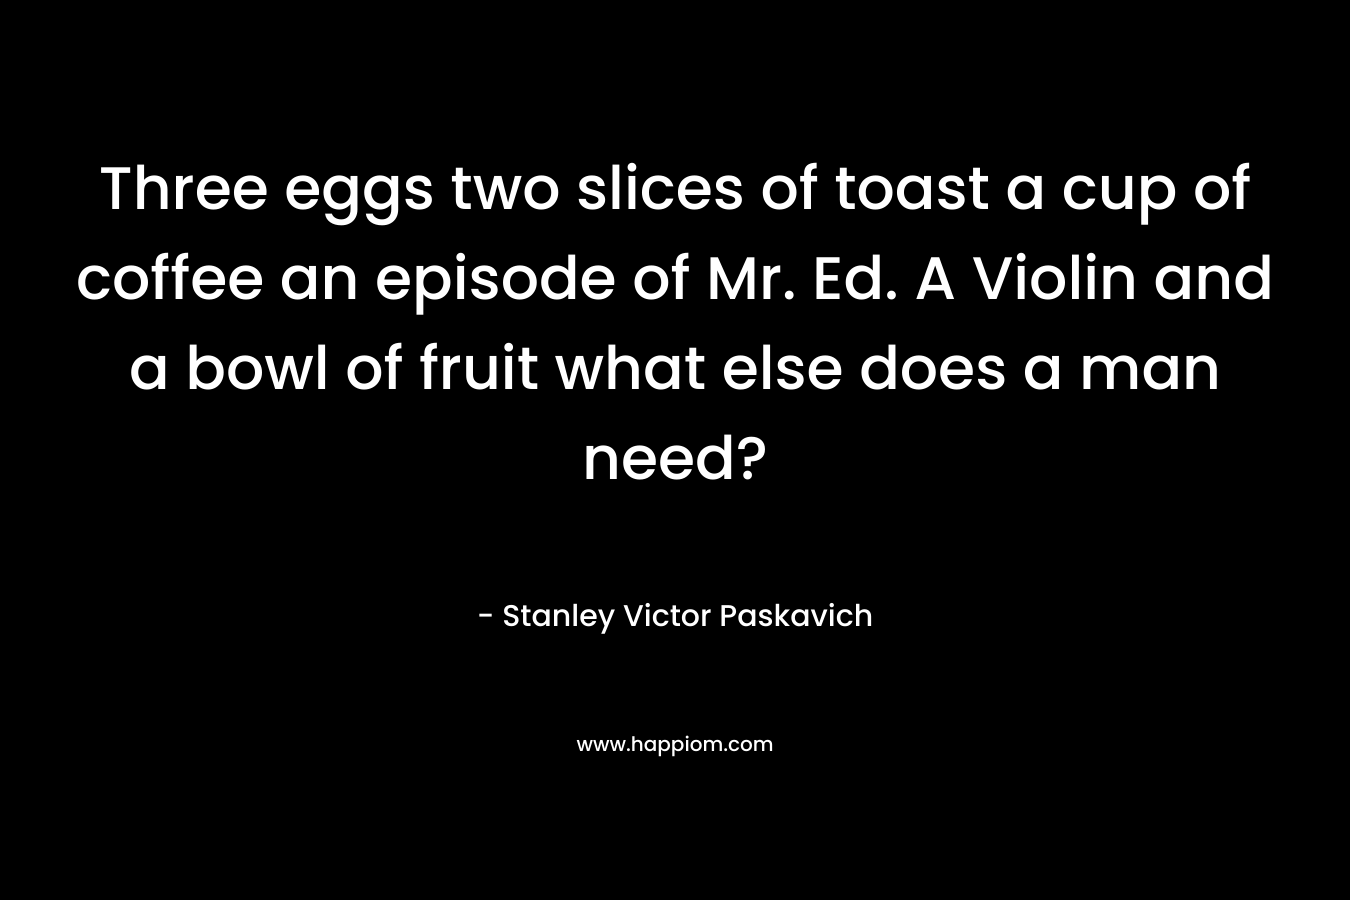 Three eggs two slices of toast a cup of coffee an episode of Mr. Ed. A Violin and a bowl of fruit what else does a man need? – Stanley Victor Paskavich